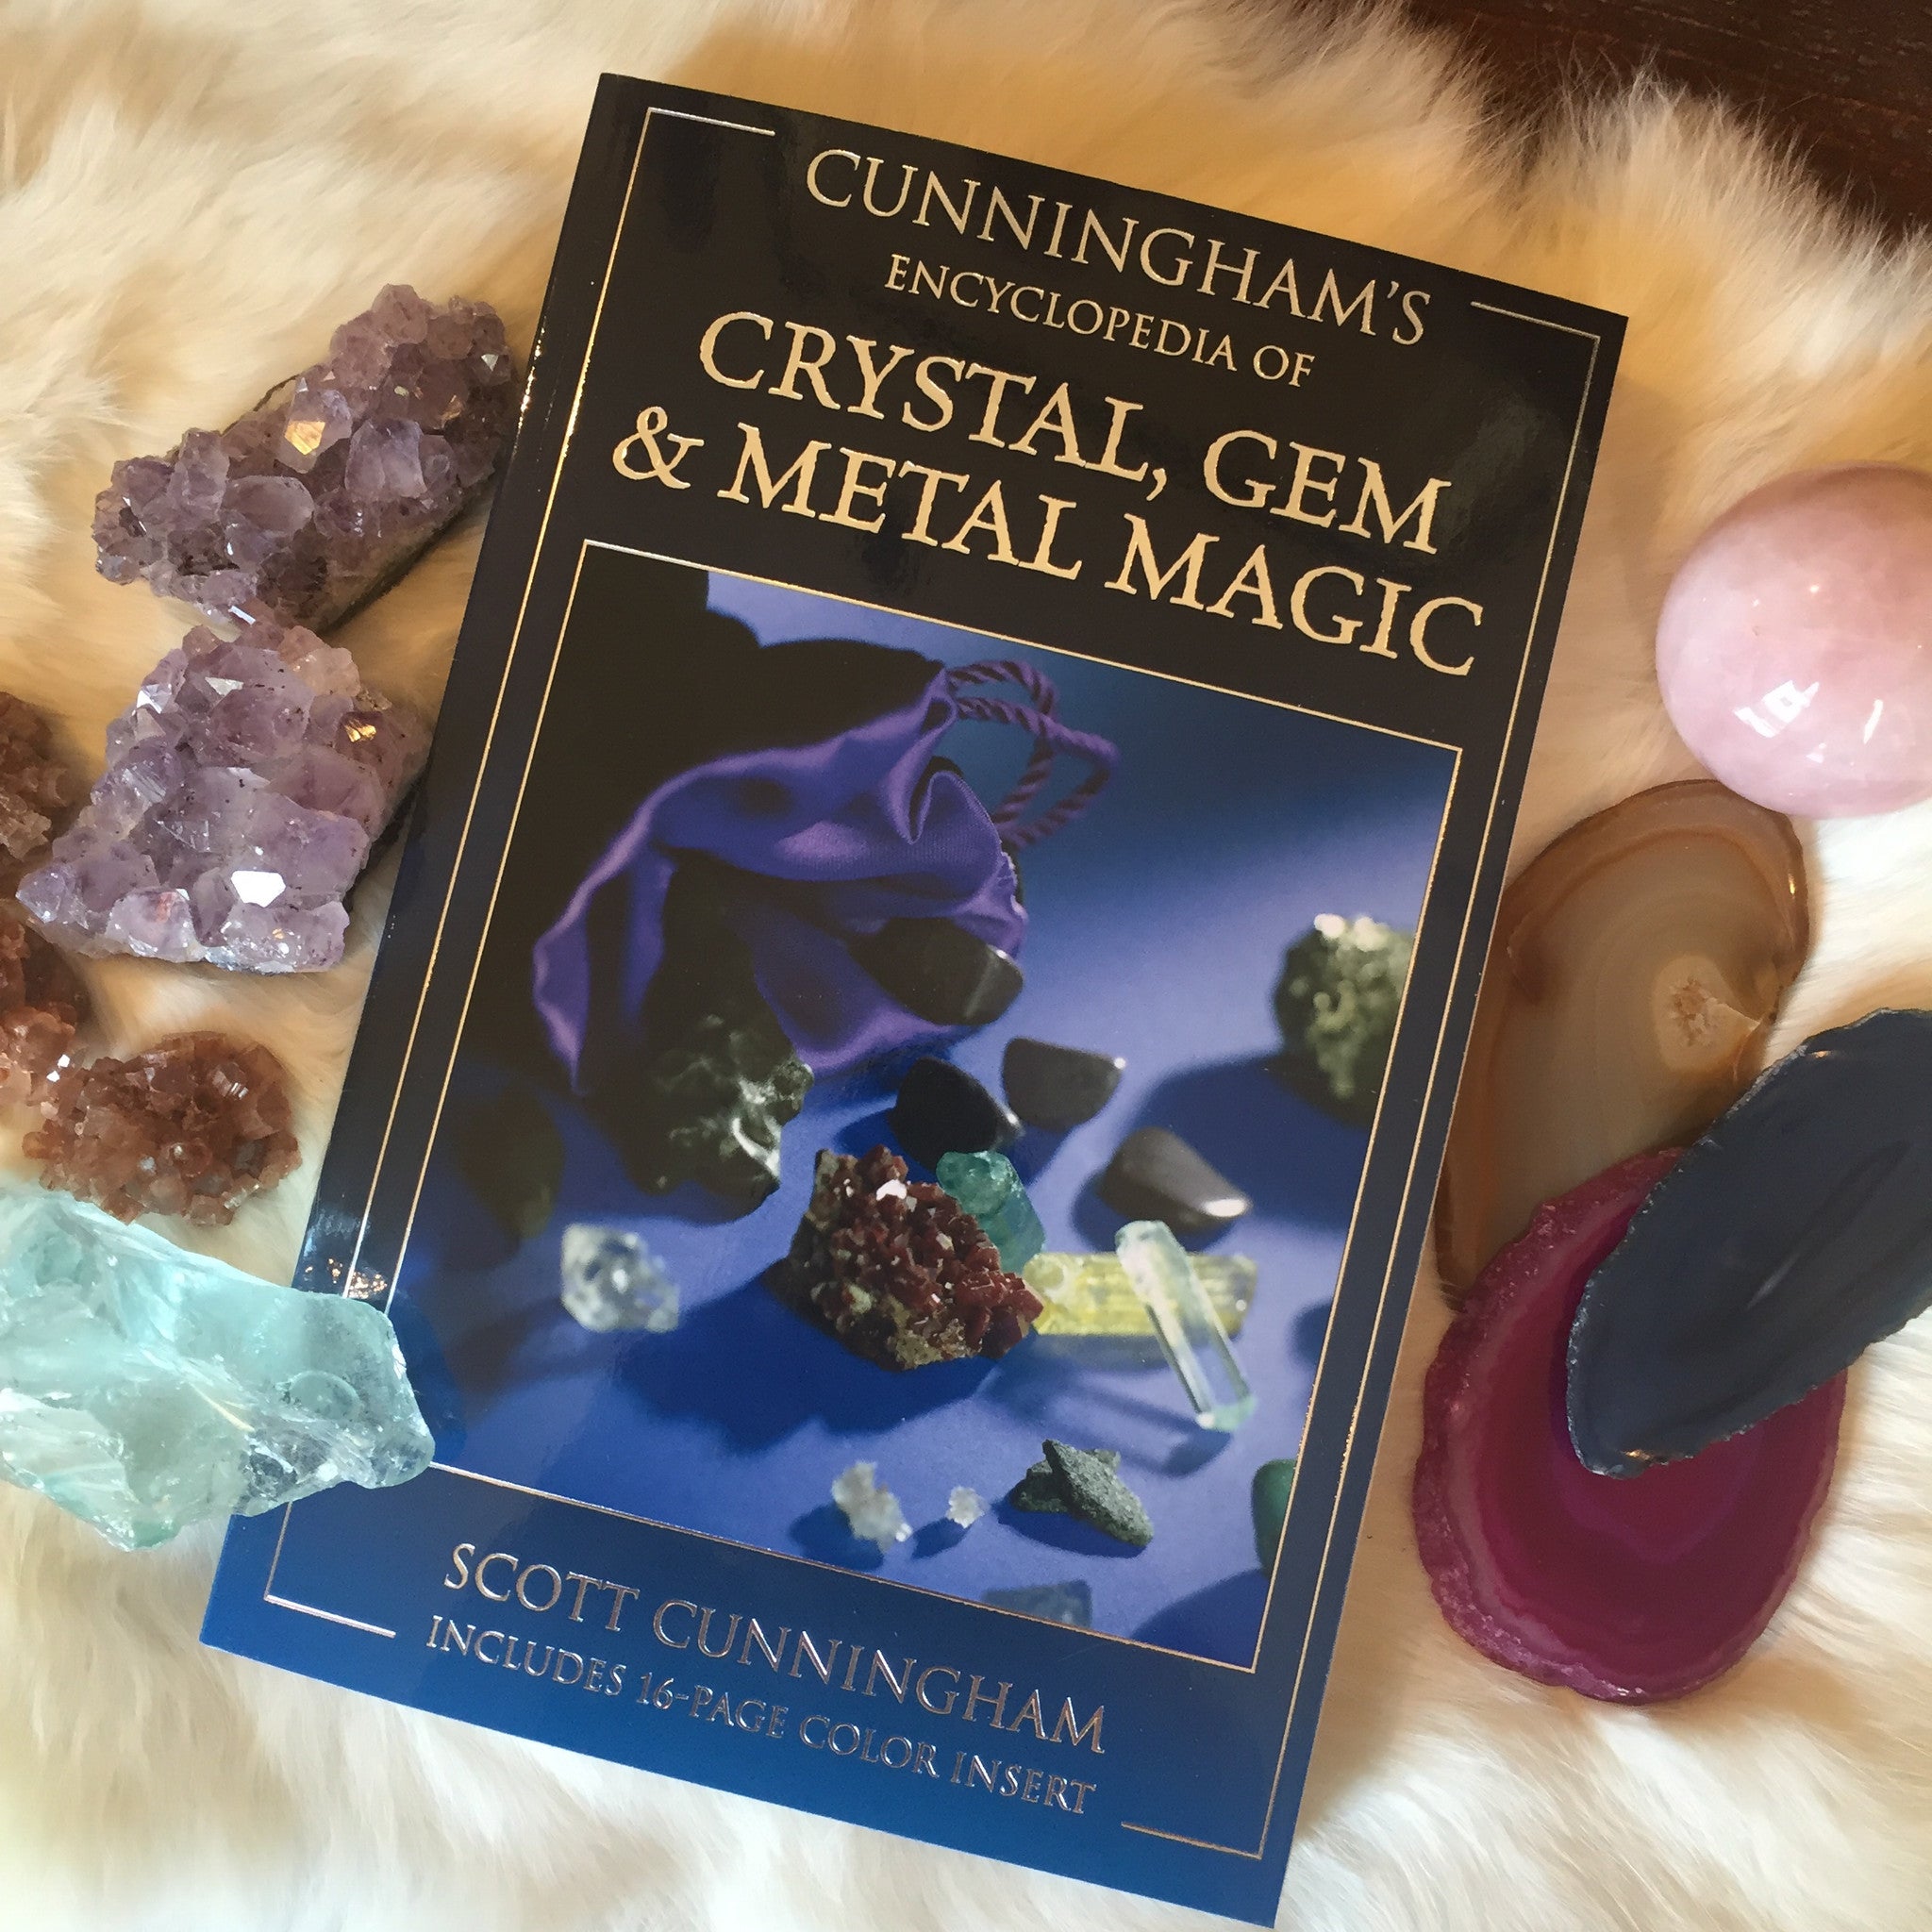  Cunninghams  s Encyclopedia of Crystals Gems and Metal 